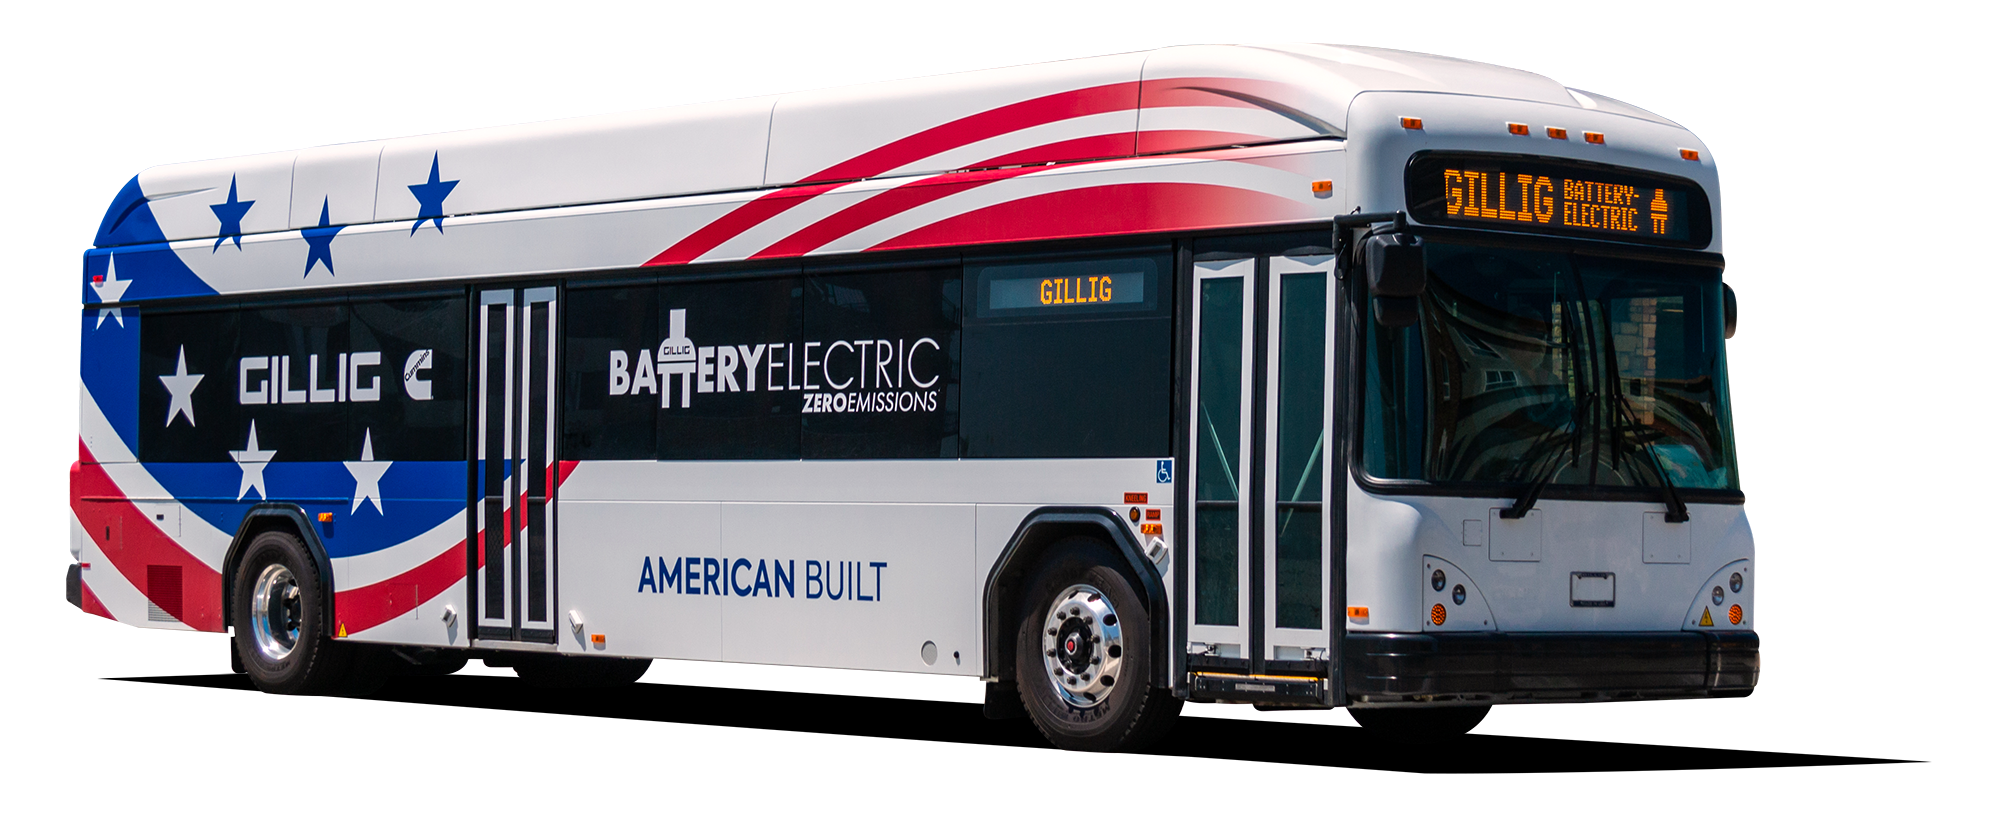 GILLIG MY20 Low Floor Battery Electric 29 35 40 Image 12 30 19